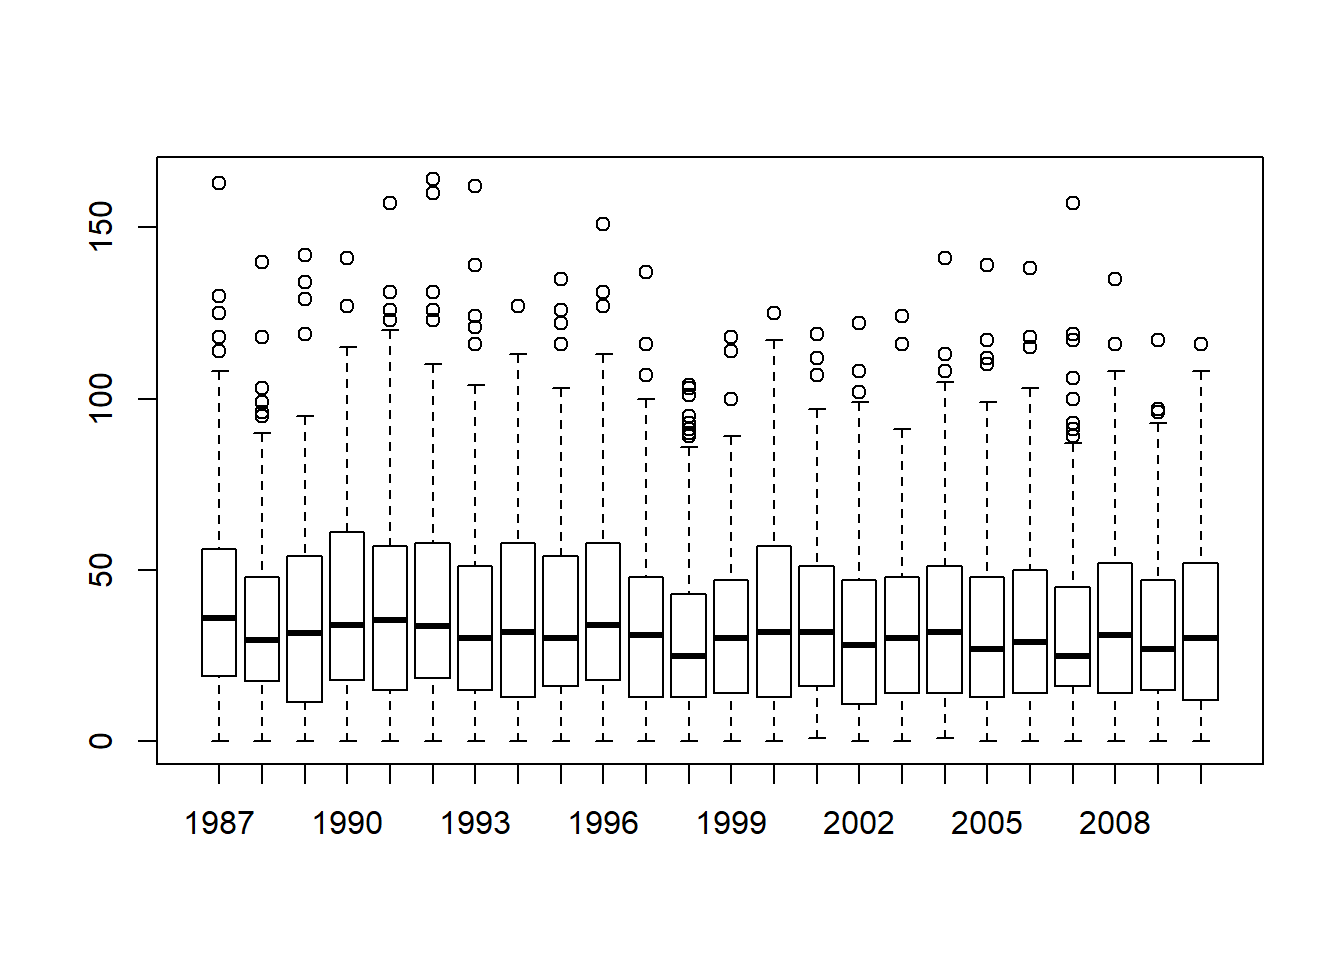 Boxplots showing the AFL winning margins for the 24 years from 1987 to 2010 inclusive. This is the default plot created by R, with no annotations added and no changes to the visual design. It's pretty readable, though at a minimum you'd want to include some basic annotations labelling the axes. Compare and contrast with Figure \@ref(fig:multipleboxplots2)